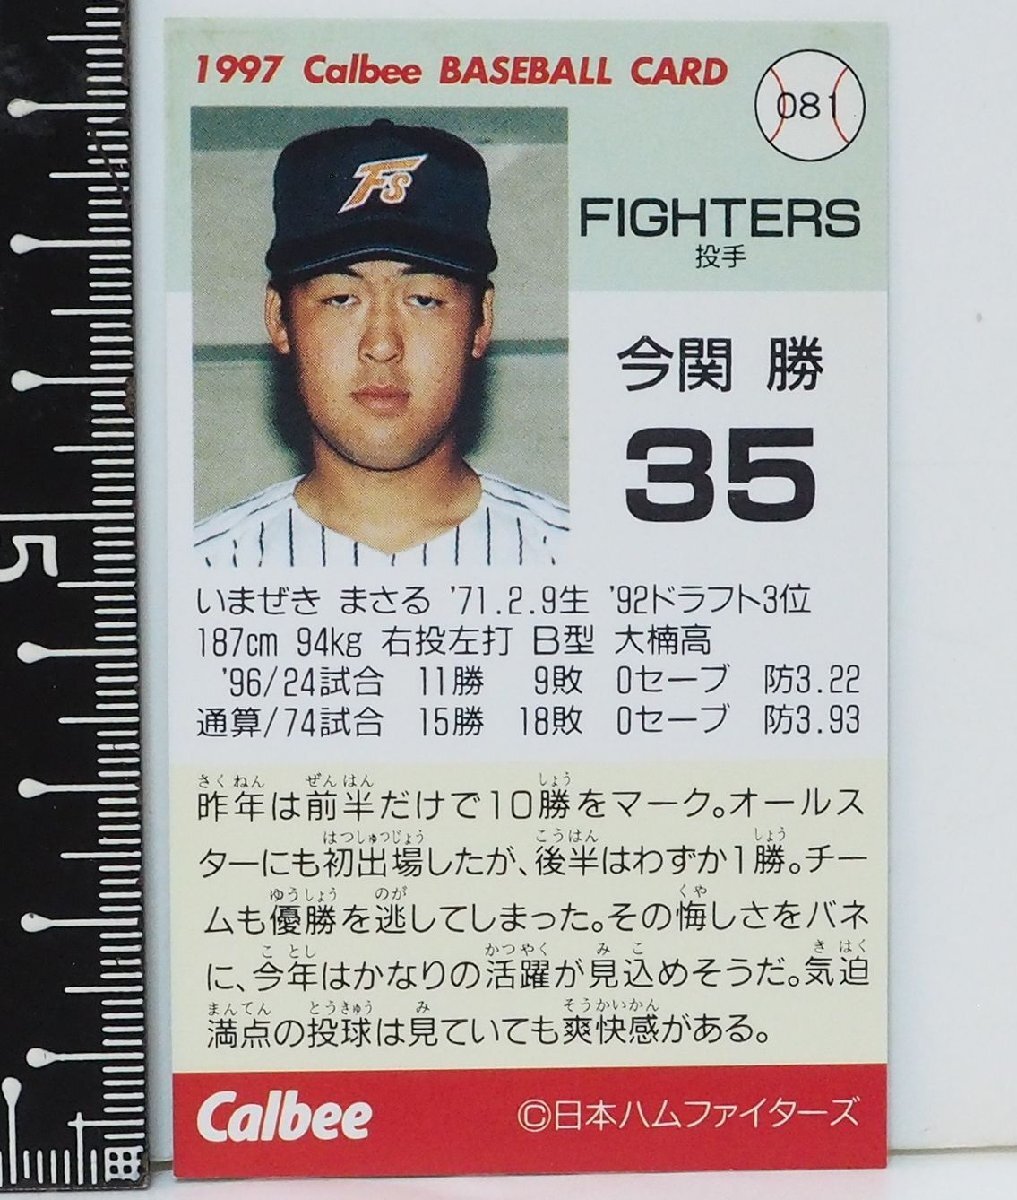 97 year Calbee Professional Baseball card 081[ now ... hand Japan ham Fighter z] Heisei era 9 year 1997 year that time thing Calbee extra Shokugan BASEBALL[ used ] including carriage 